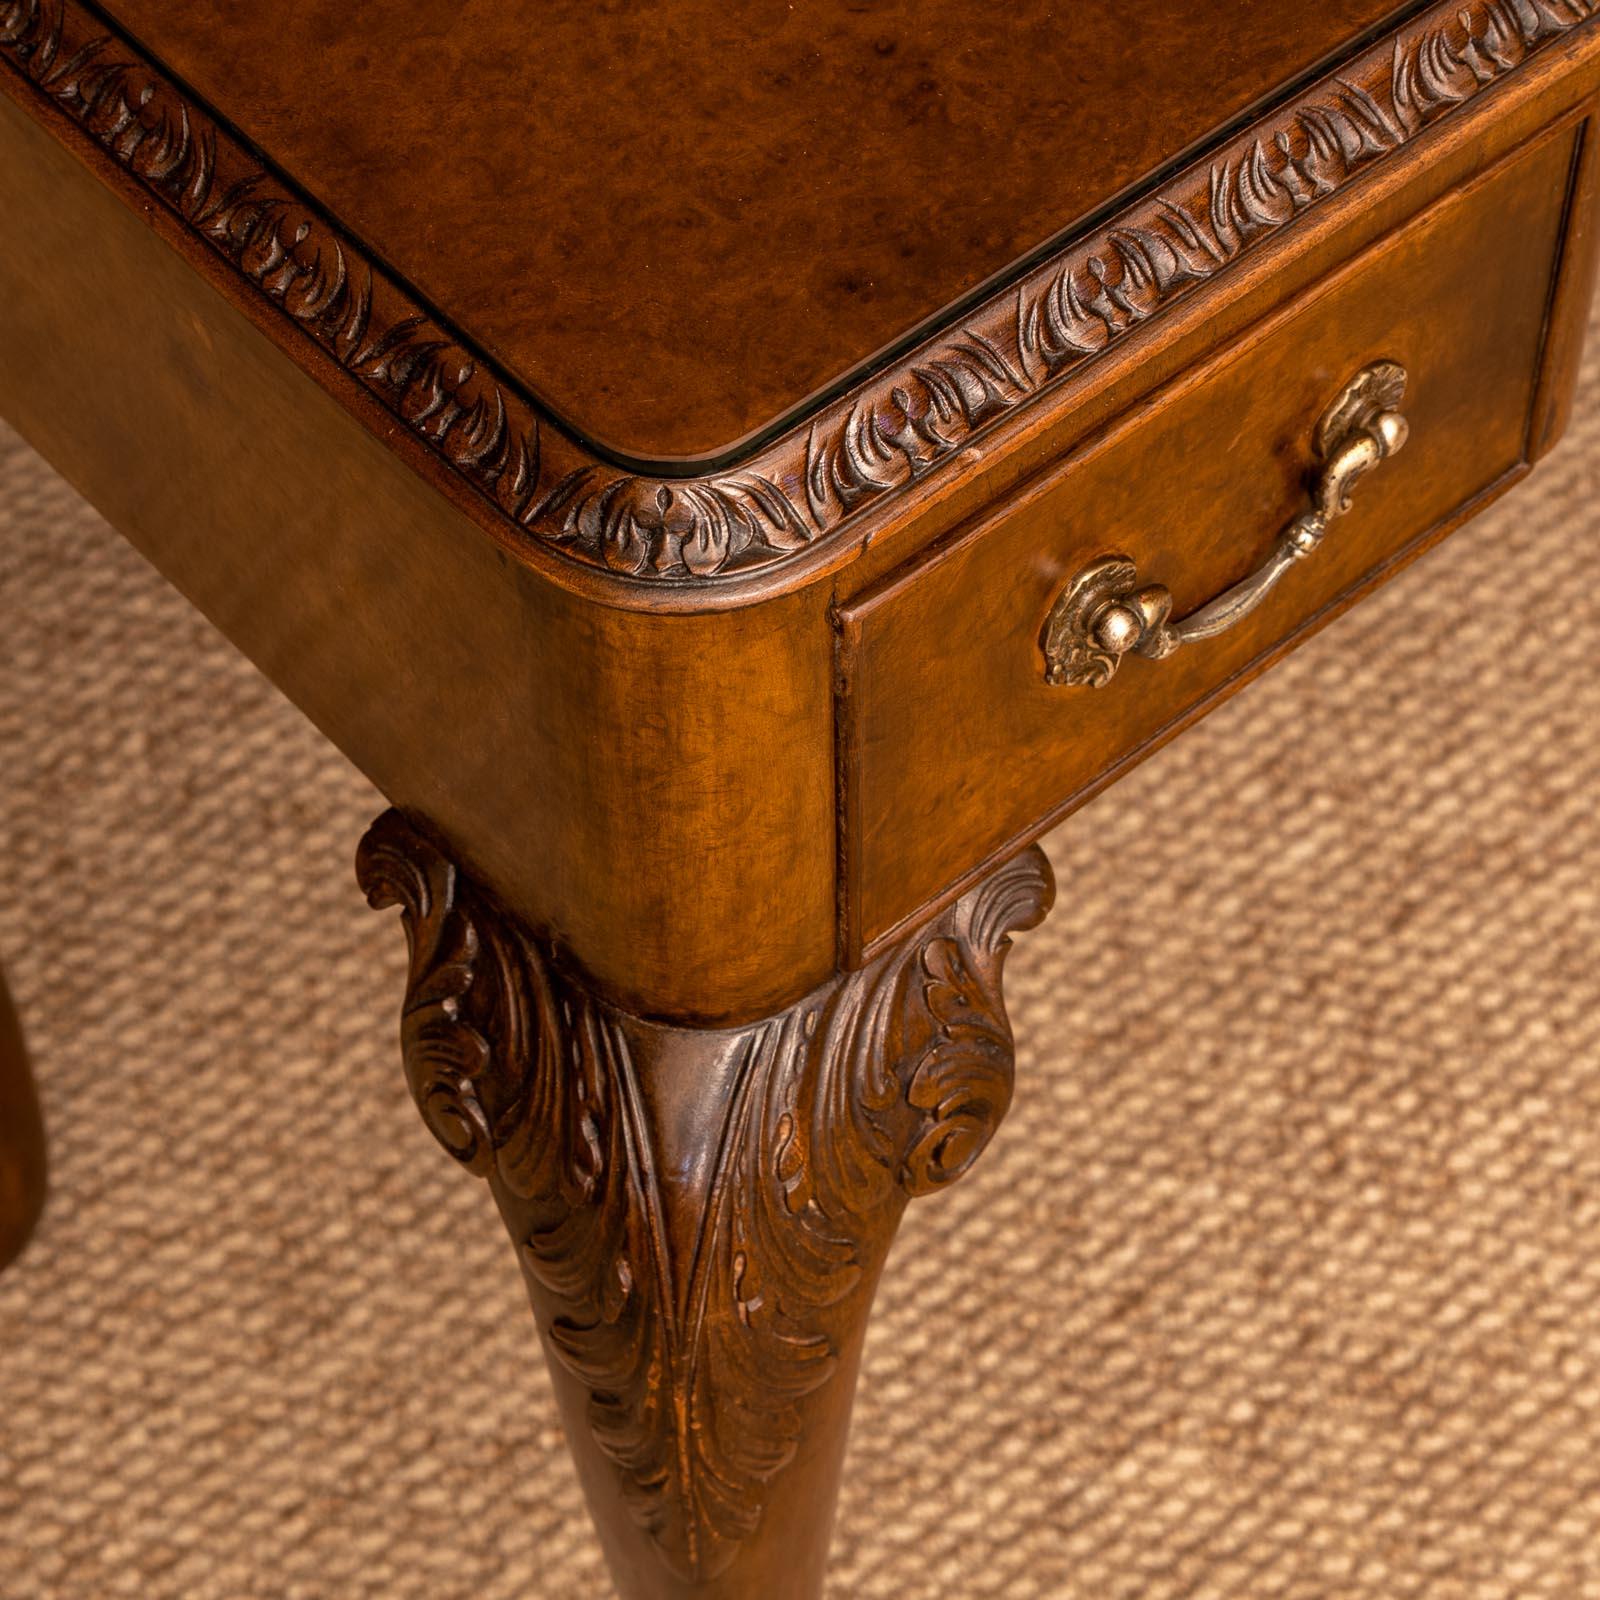 Polished Queen Anne Style Walnut Side Table